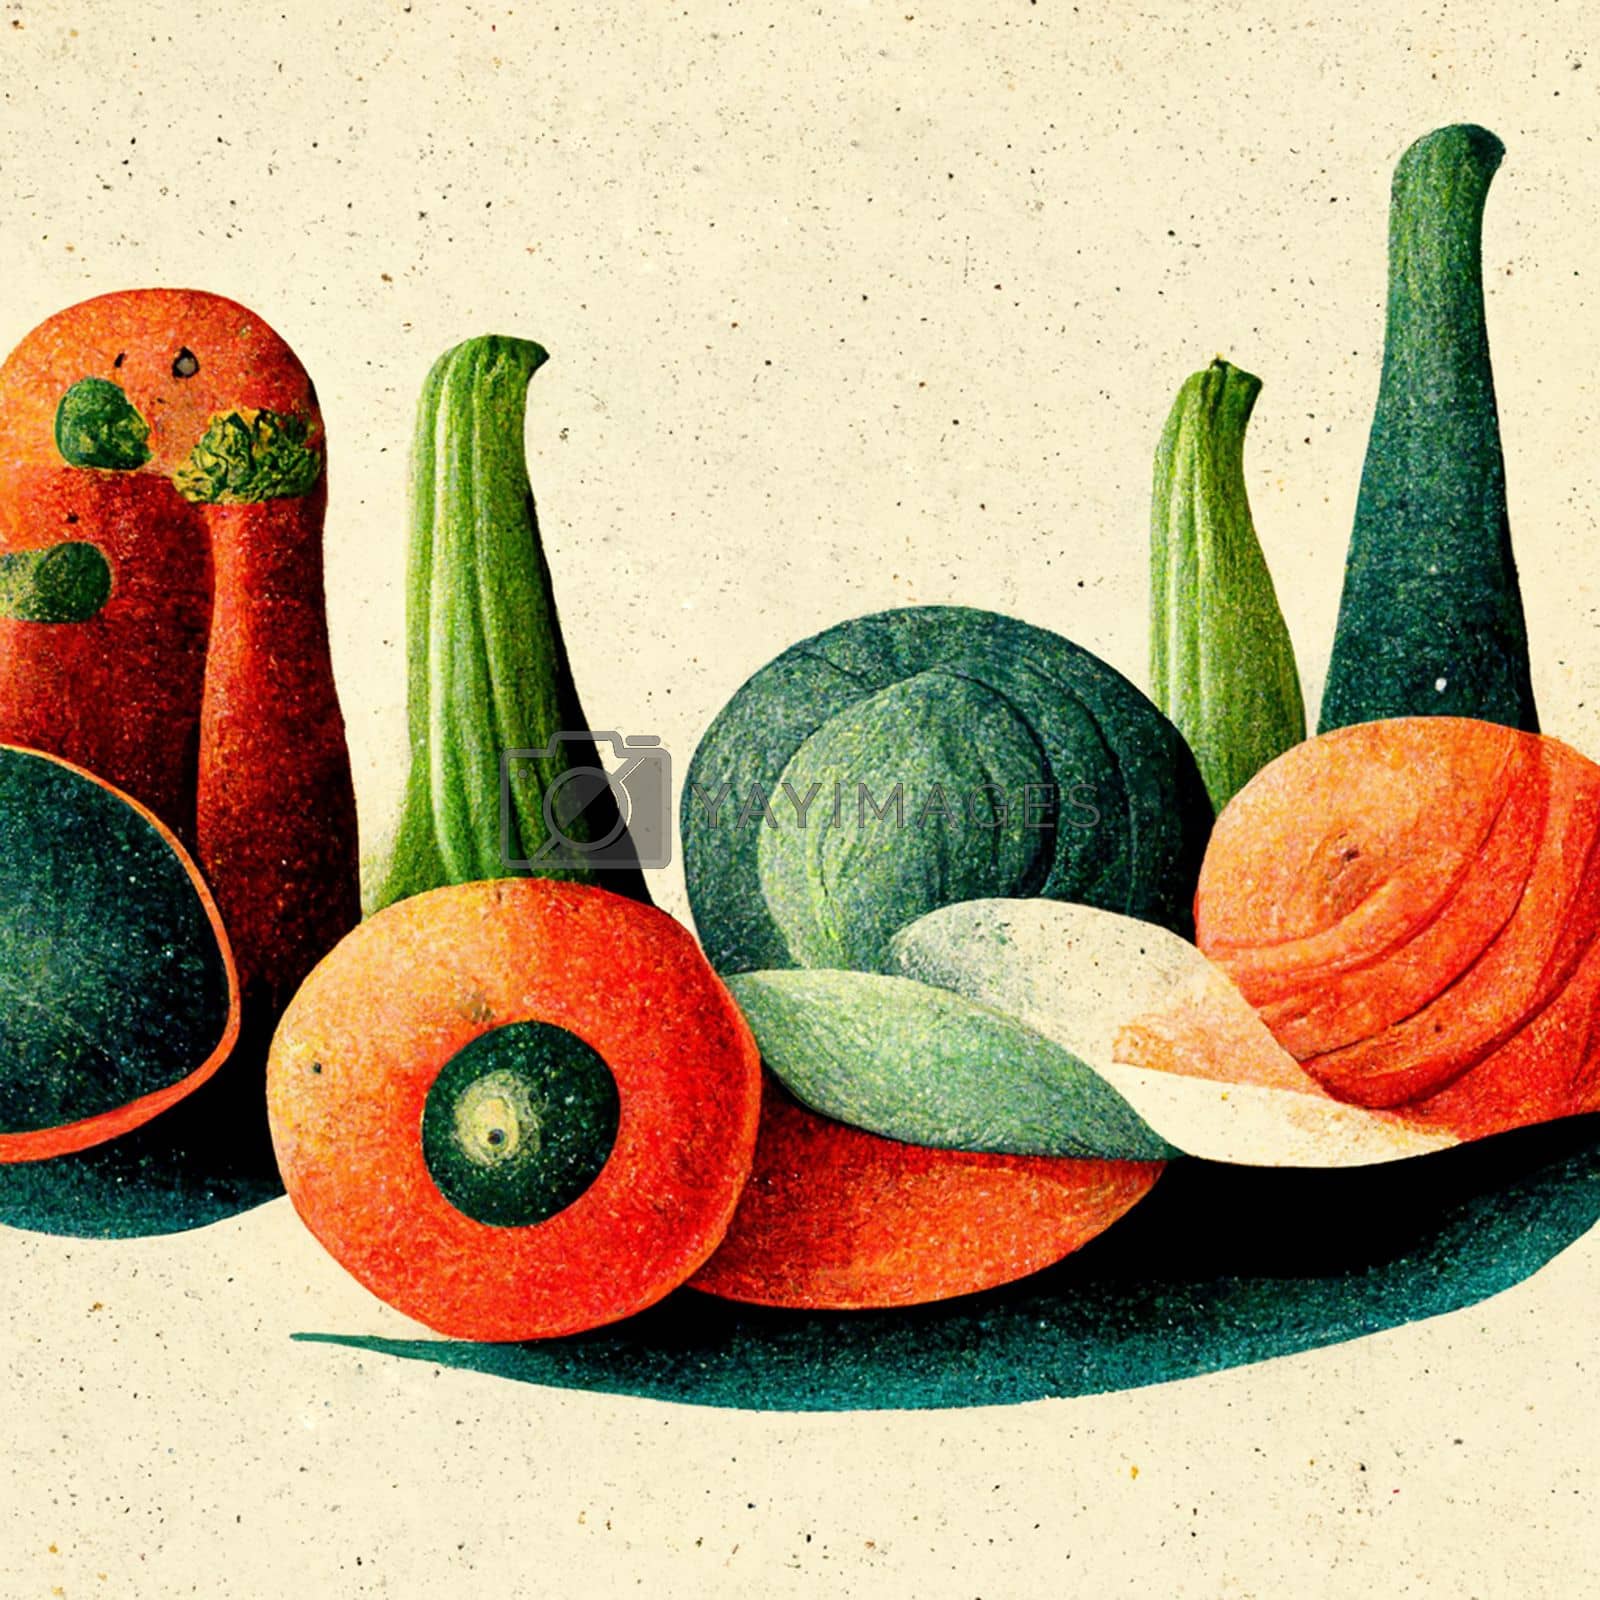 Royalty free image of Minimalist retro  illustration with vegetables and fruits. by marylooo